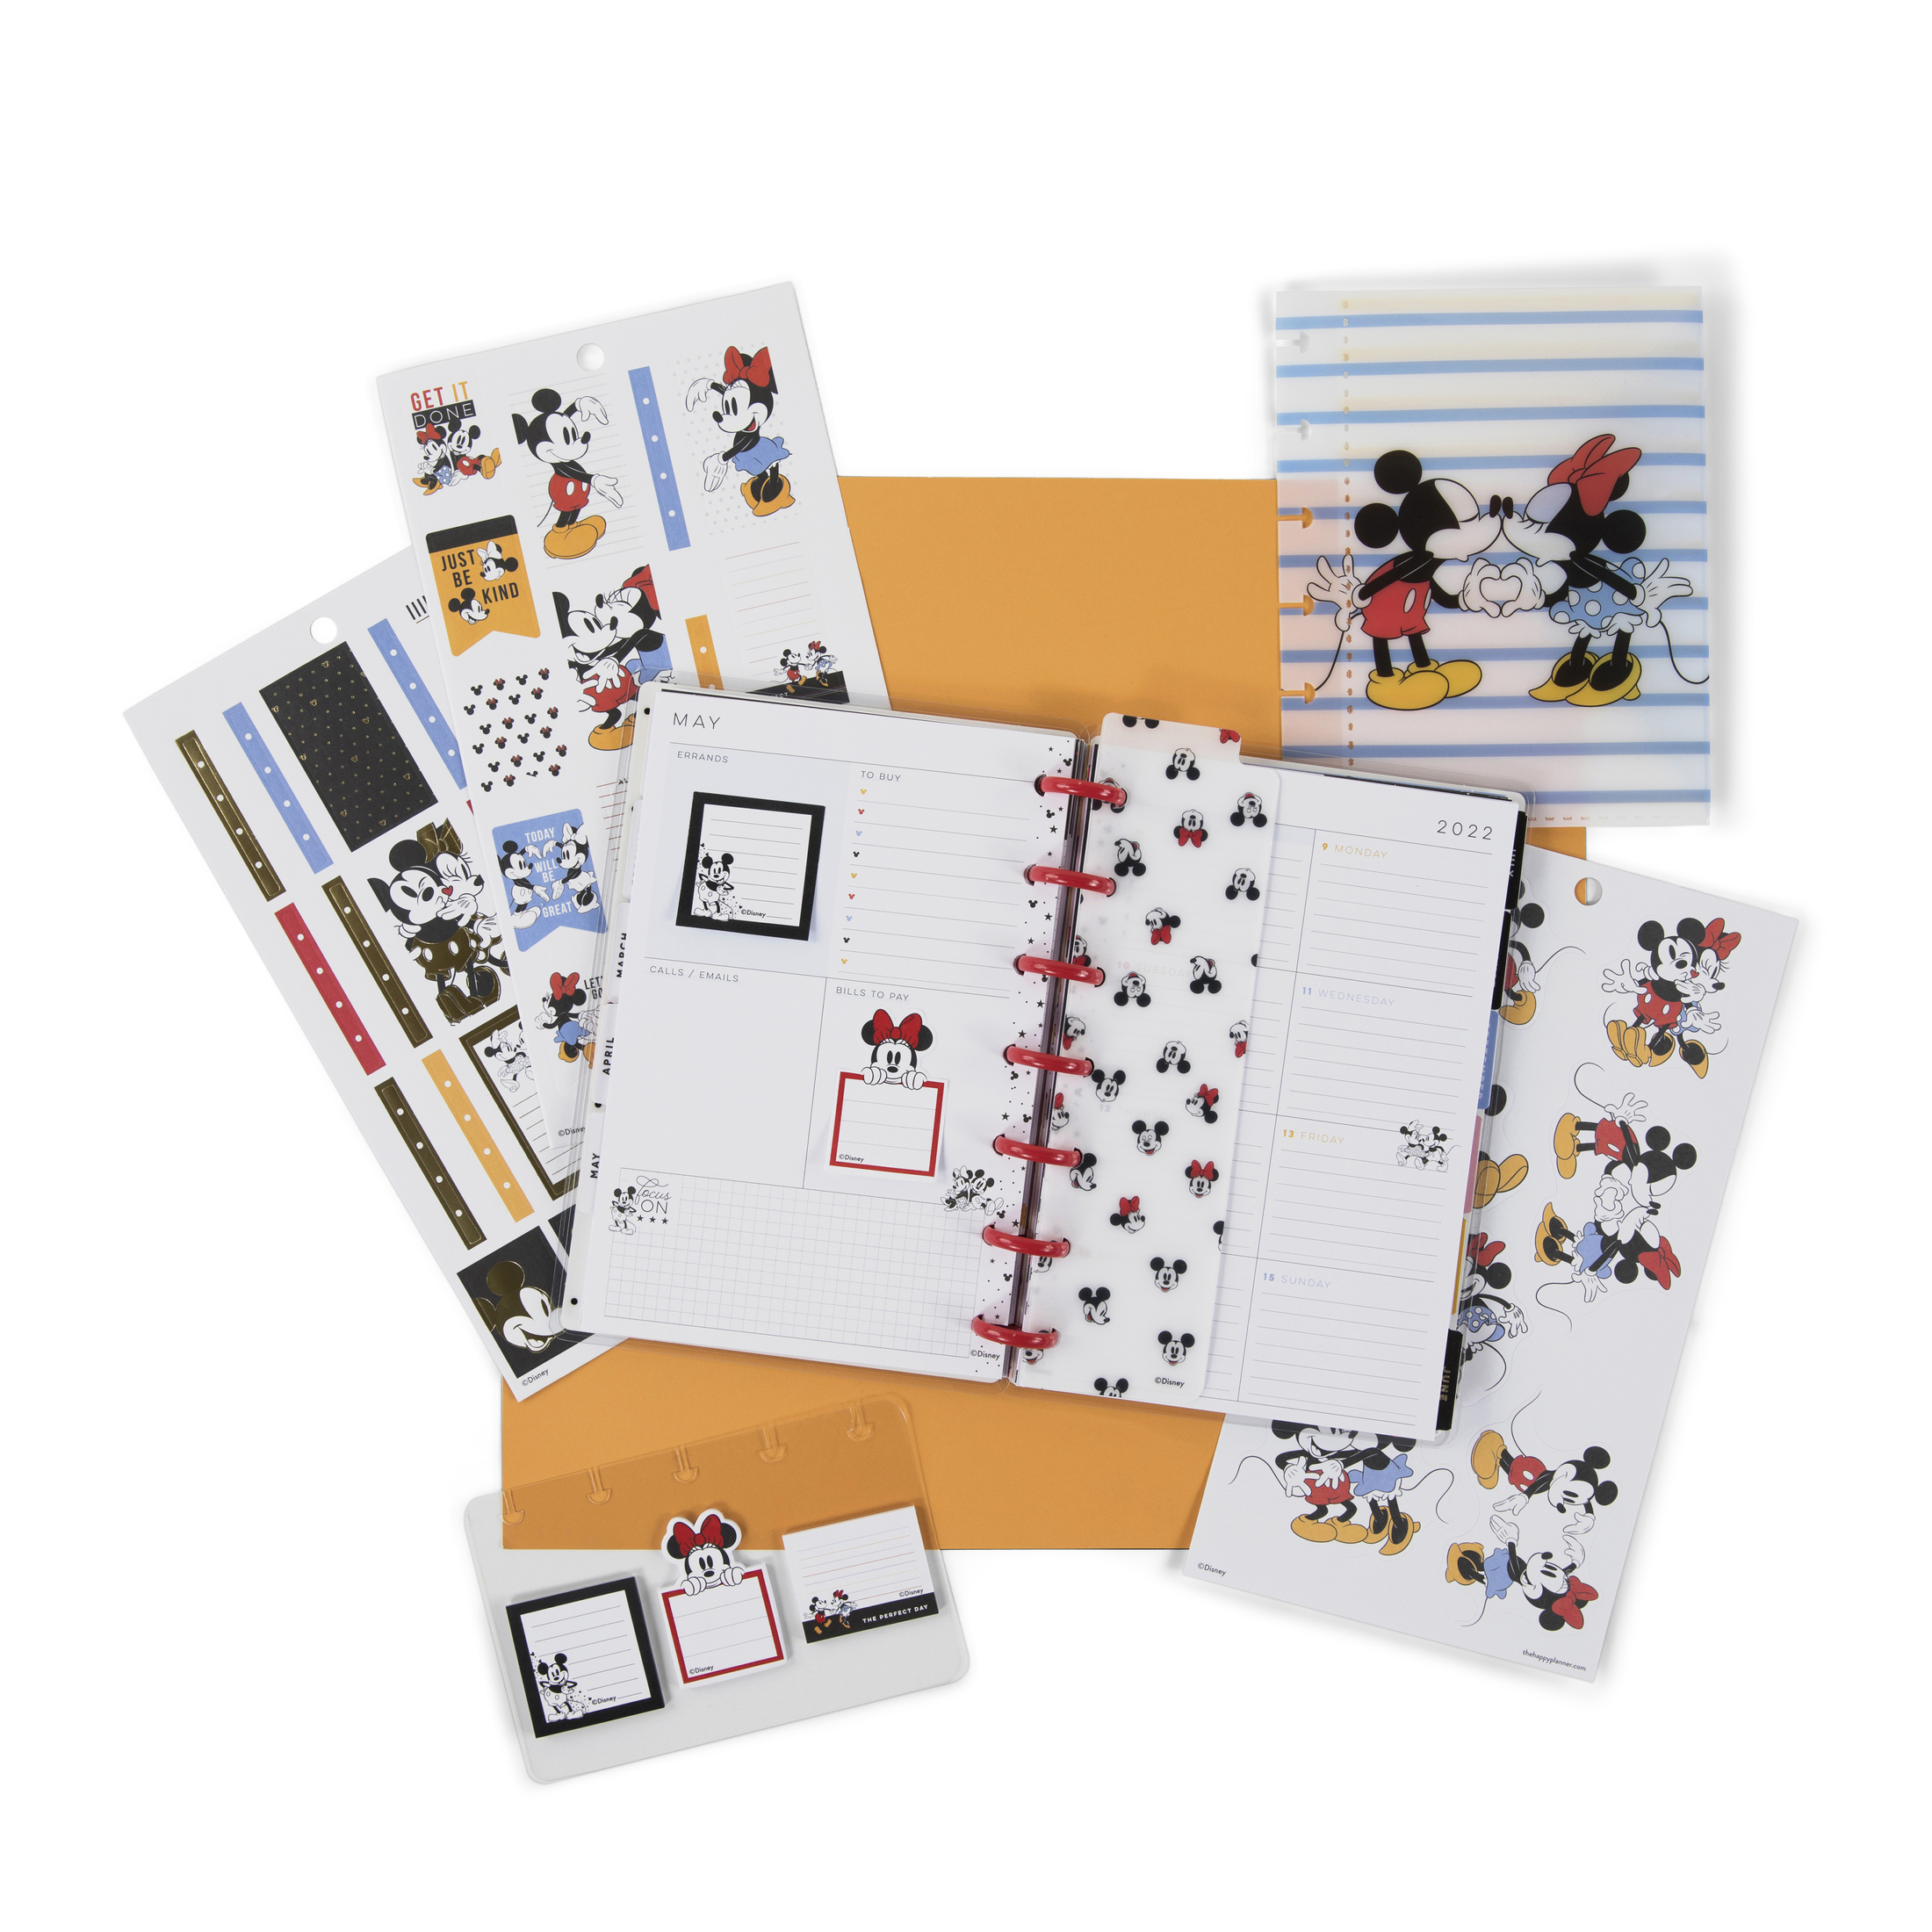 The Happy Planner, Disney, Mickey Mouse & Minnie Mouse Mini Planner Box Kit, 2022, 10" x 1.25" x 8" - image 4 of 11